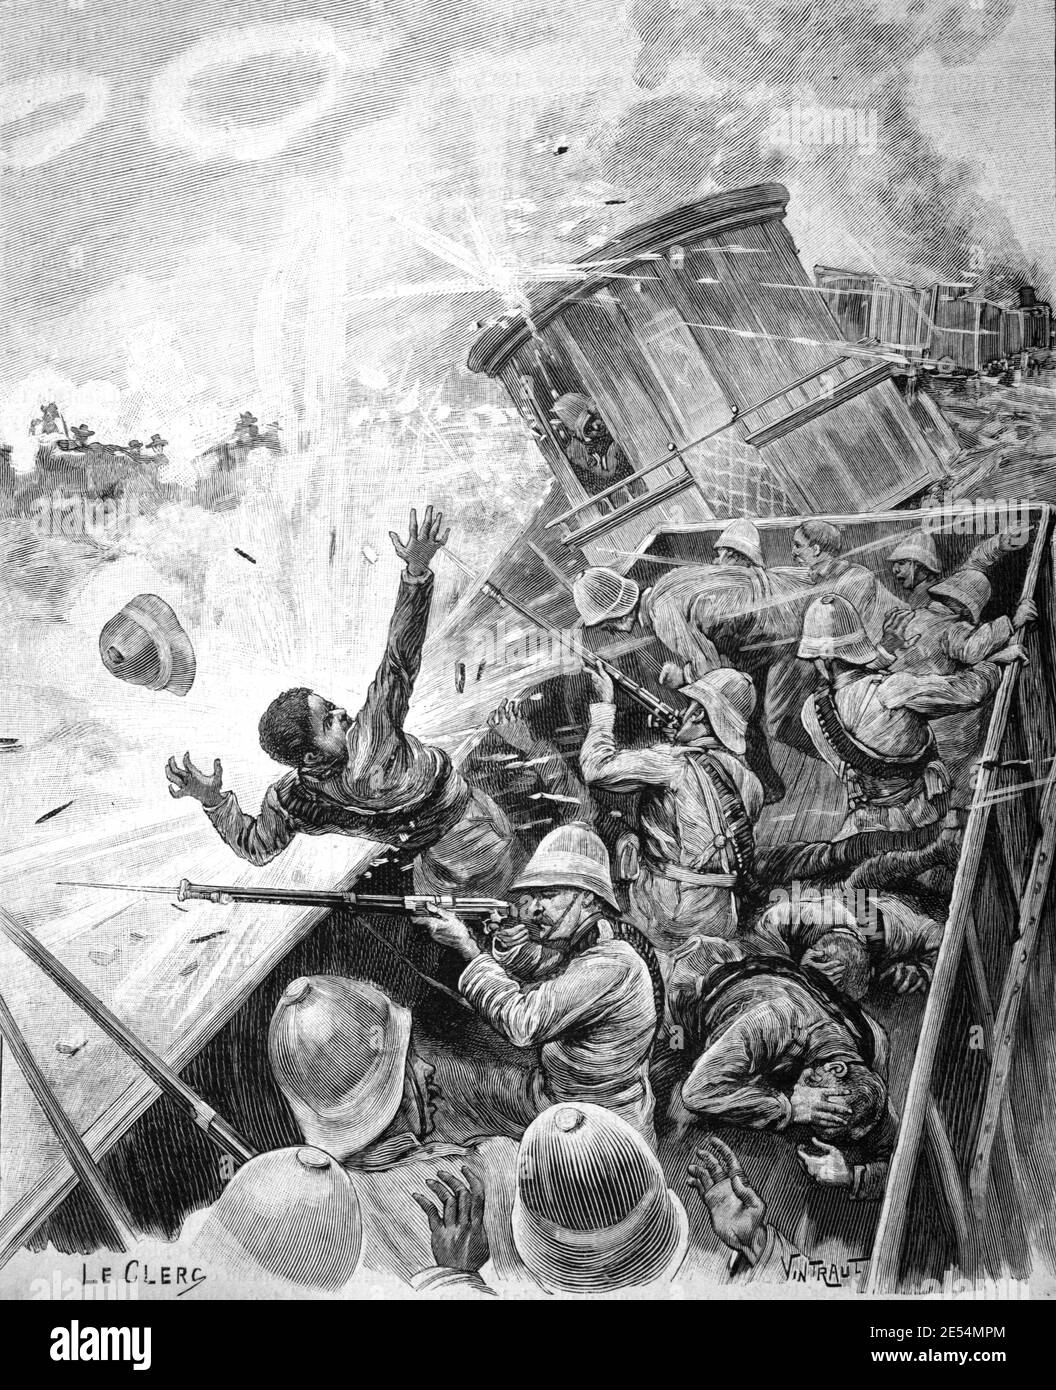 Siege of Ladysmith (1899-1900) during the Second Boer War, Ladysmith Natal South Africa. 1900 Vintage Illustration or Engraving Stock Photo